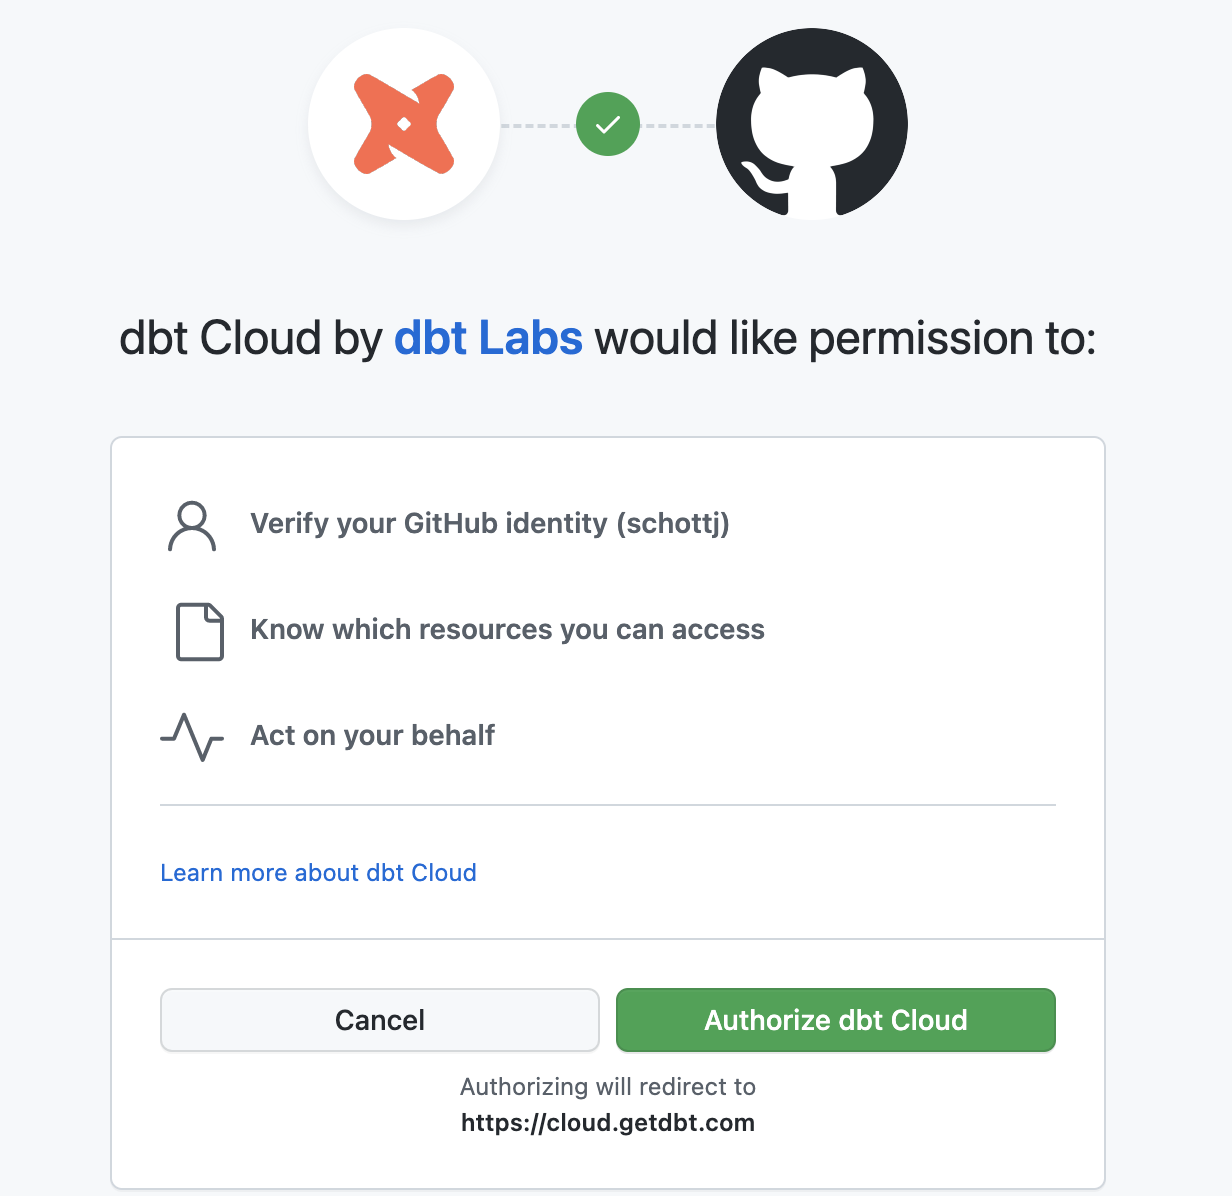 Authorizing the dbt Cloud app for developers